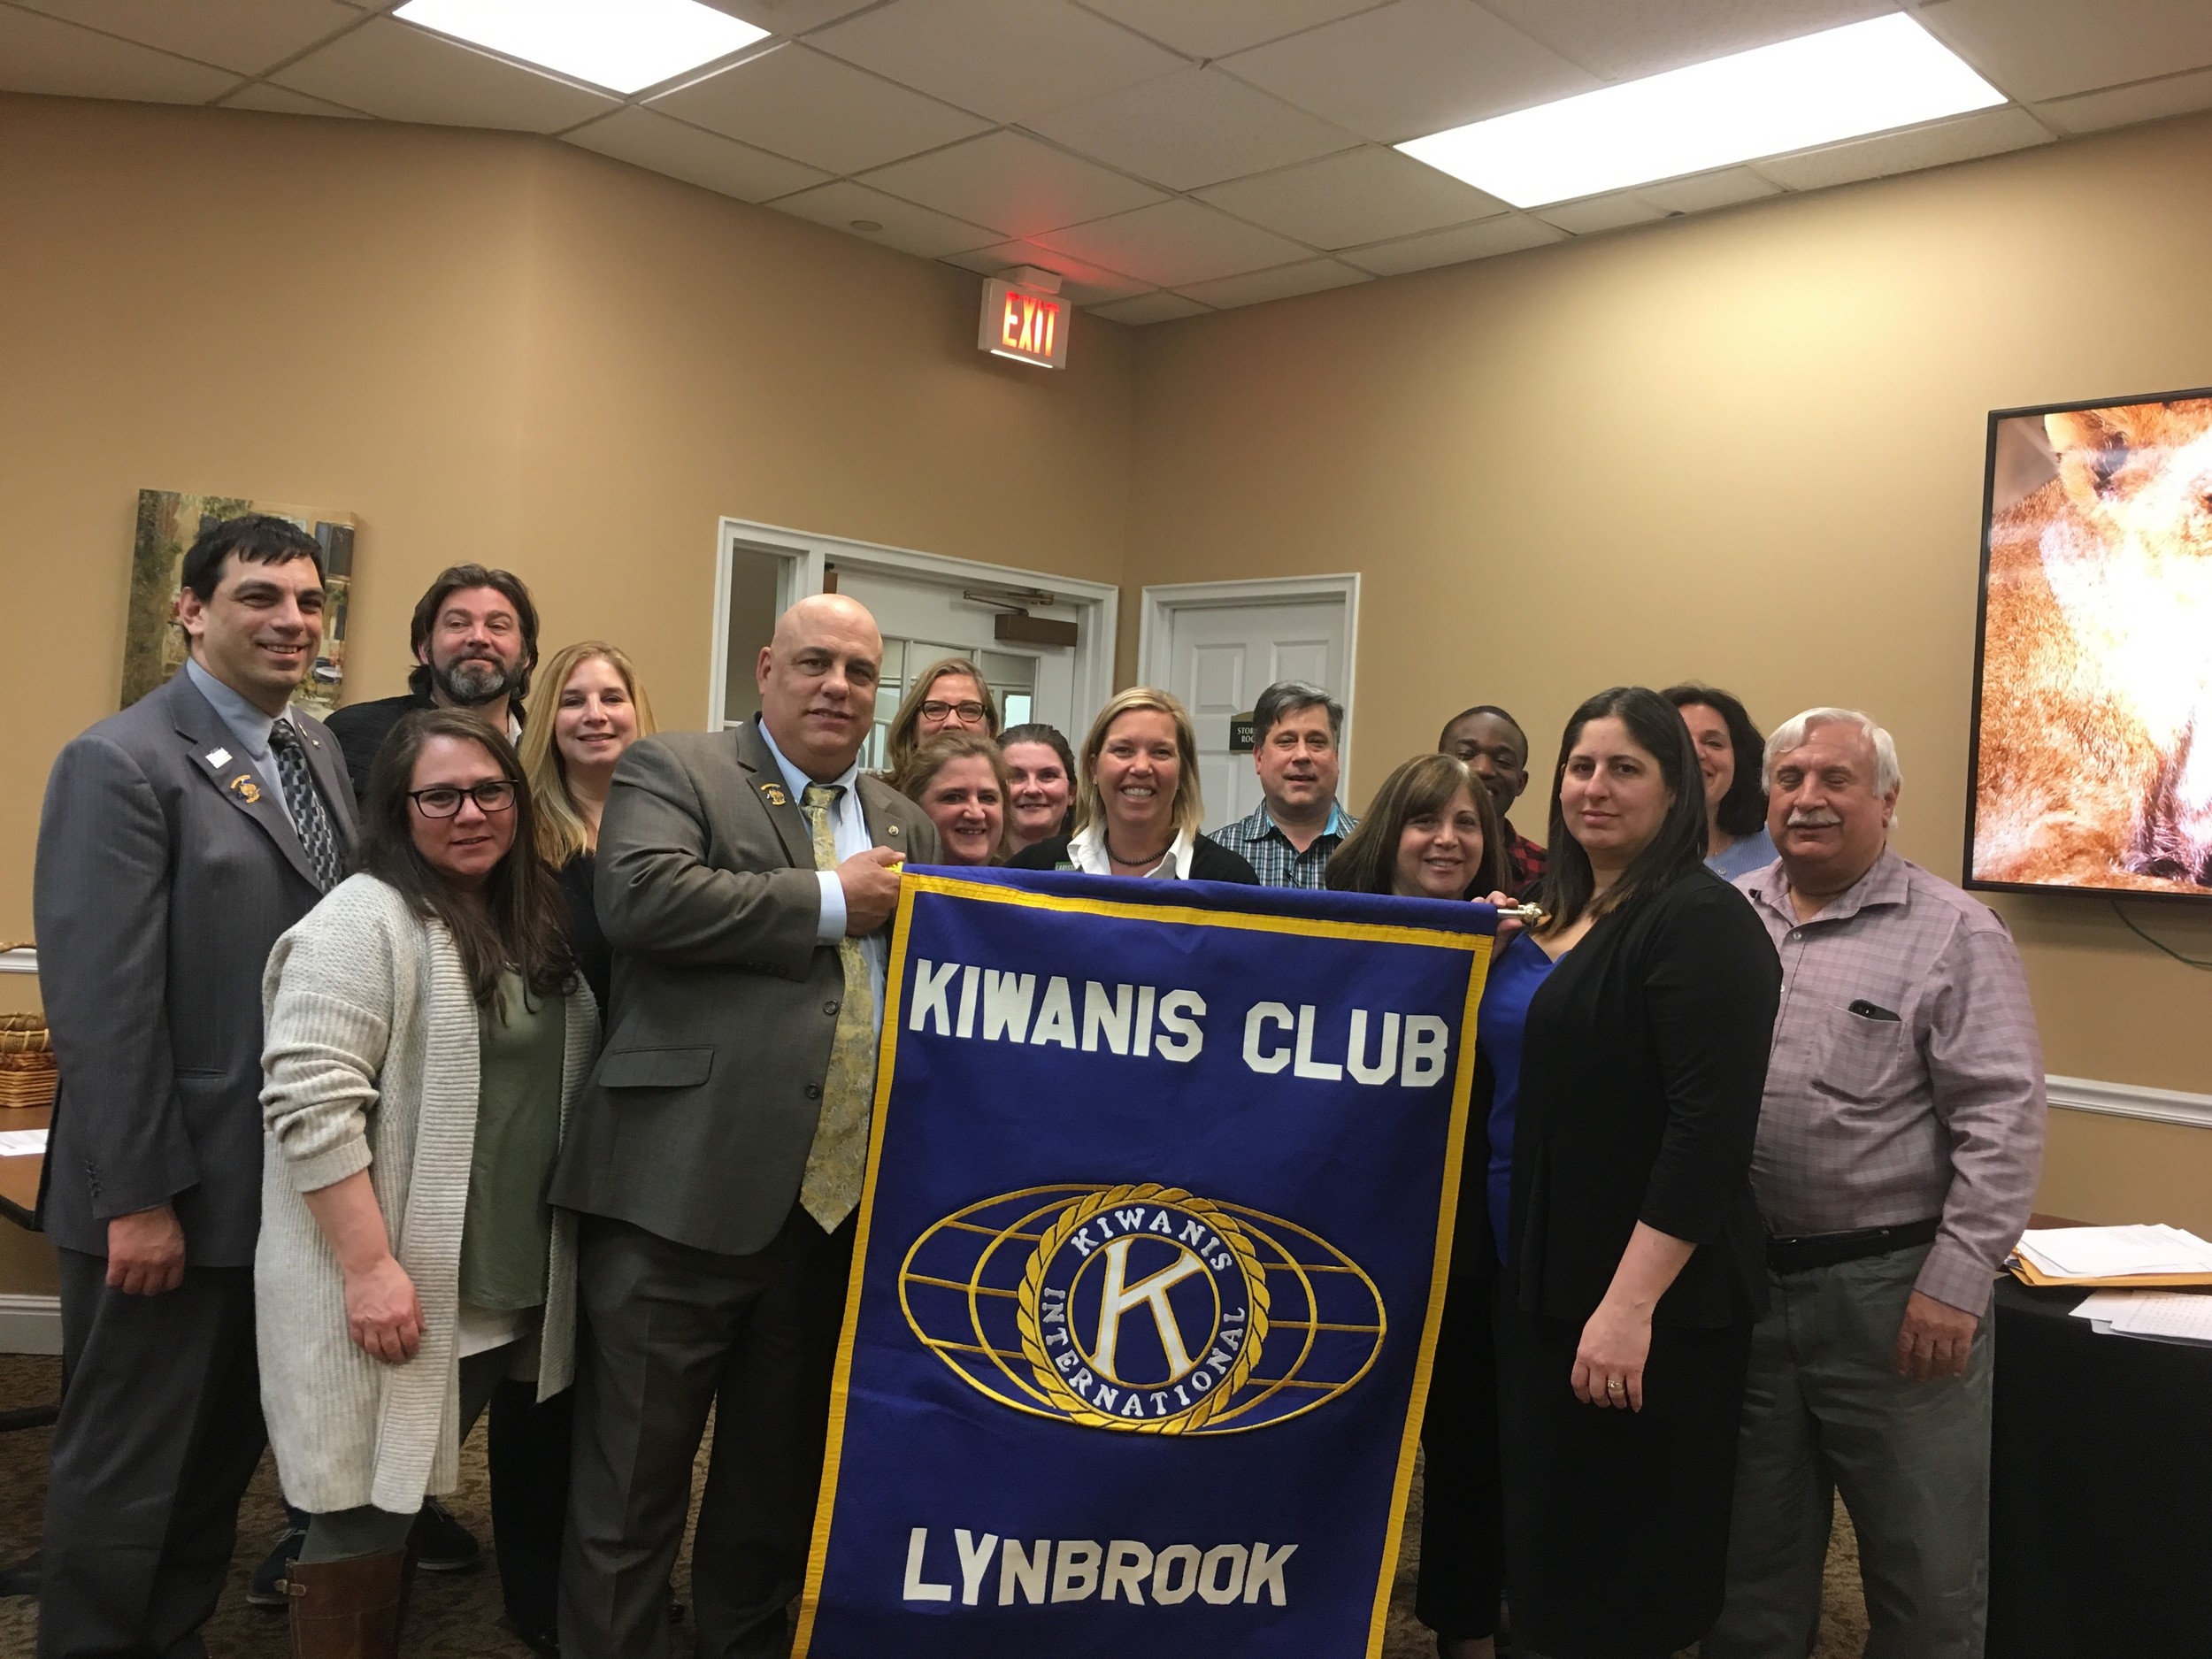 At the Lynbrook Kiwanis Club’s first meeting on March 22, 14 people were in attendance.